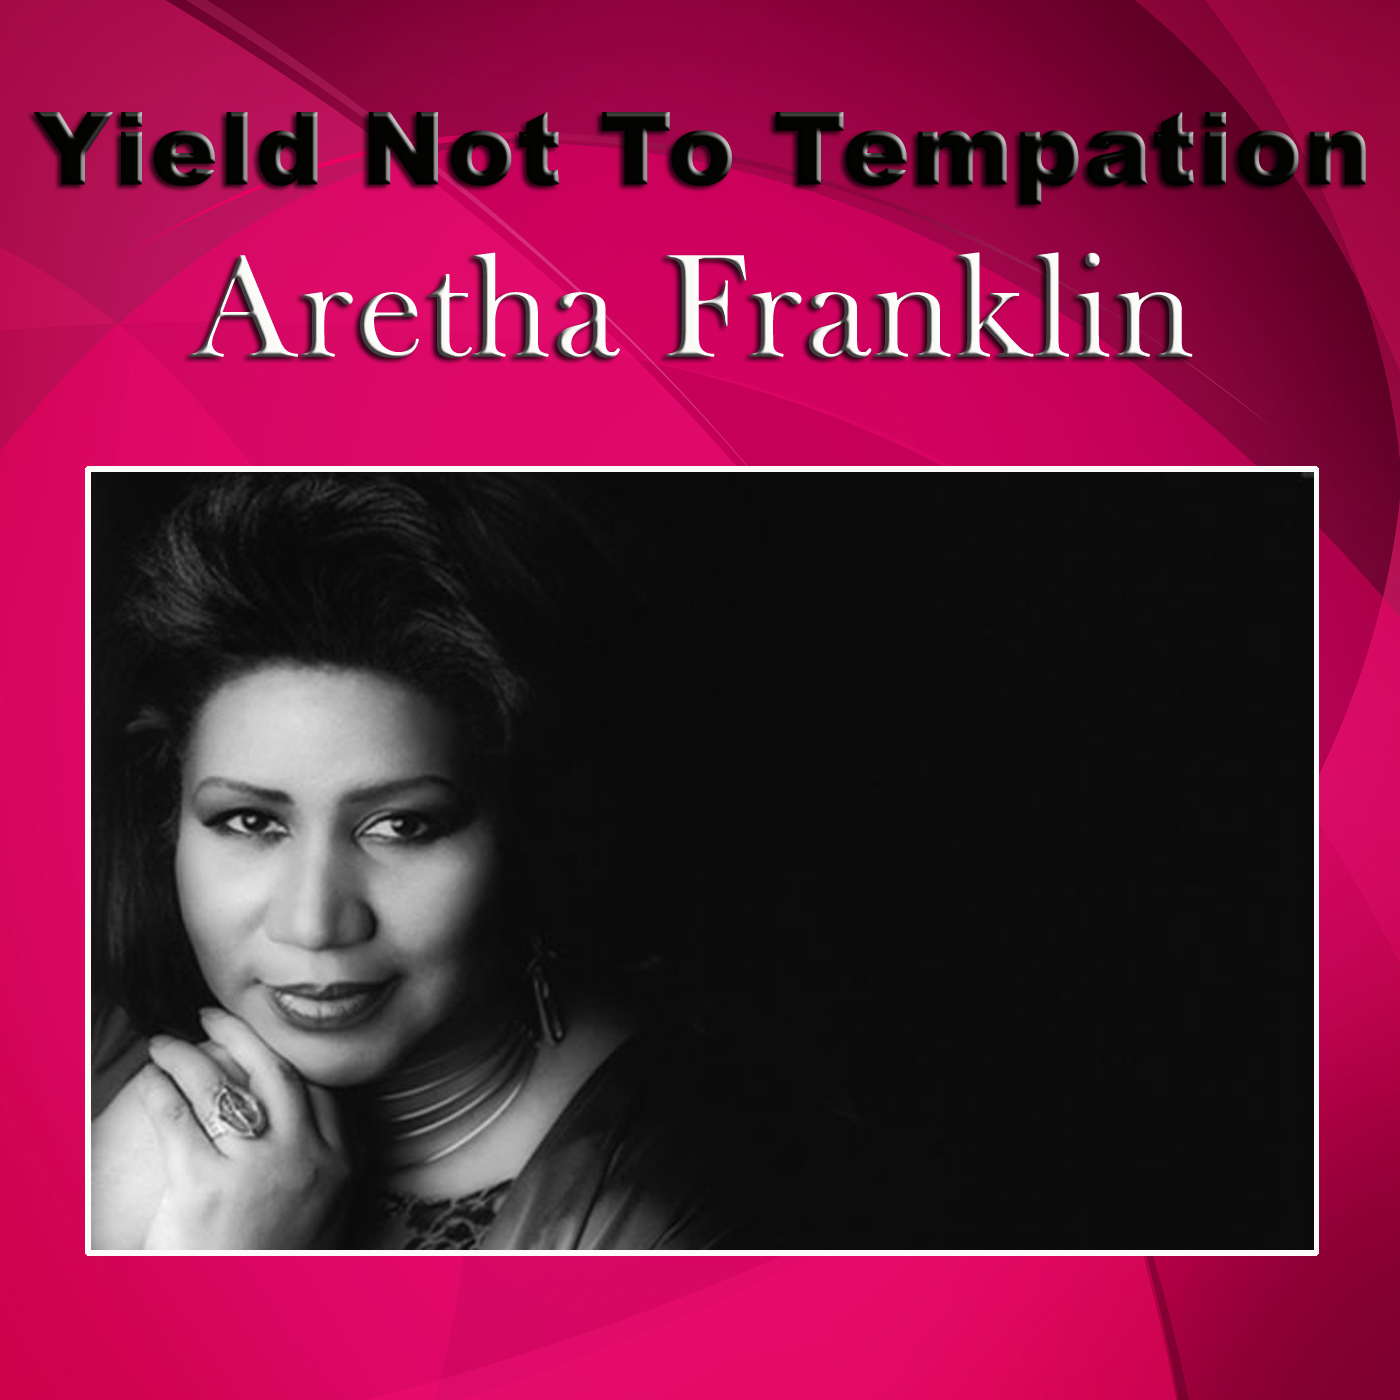 Yield Not To Temptation